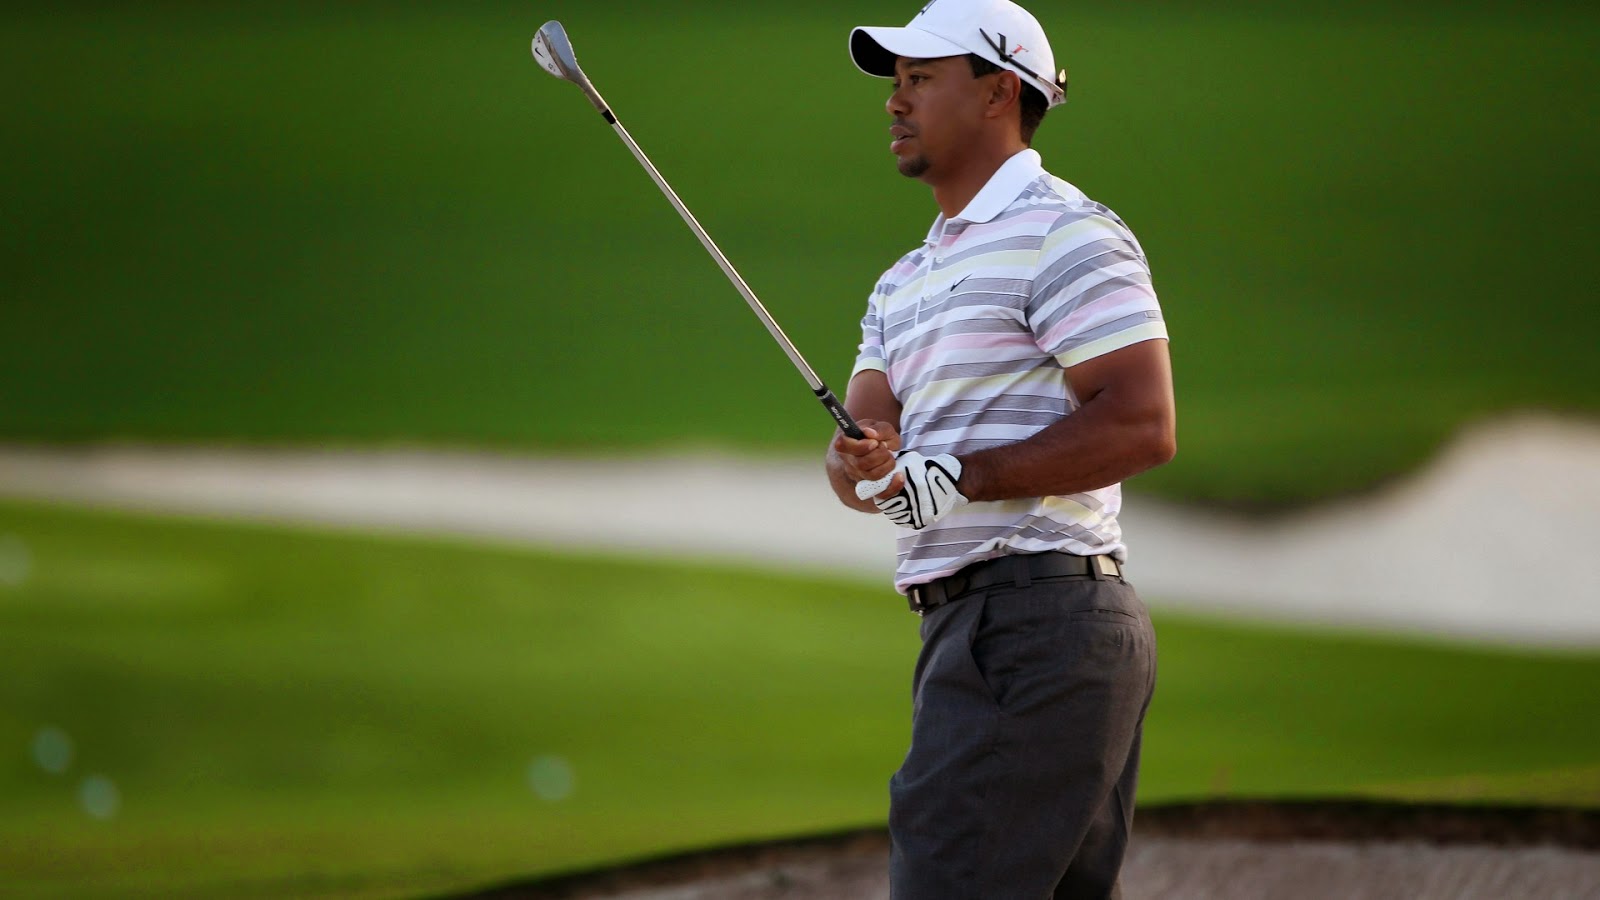 Tiger Woods is an American professional golfer who is among the most succes...